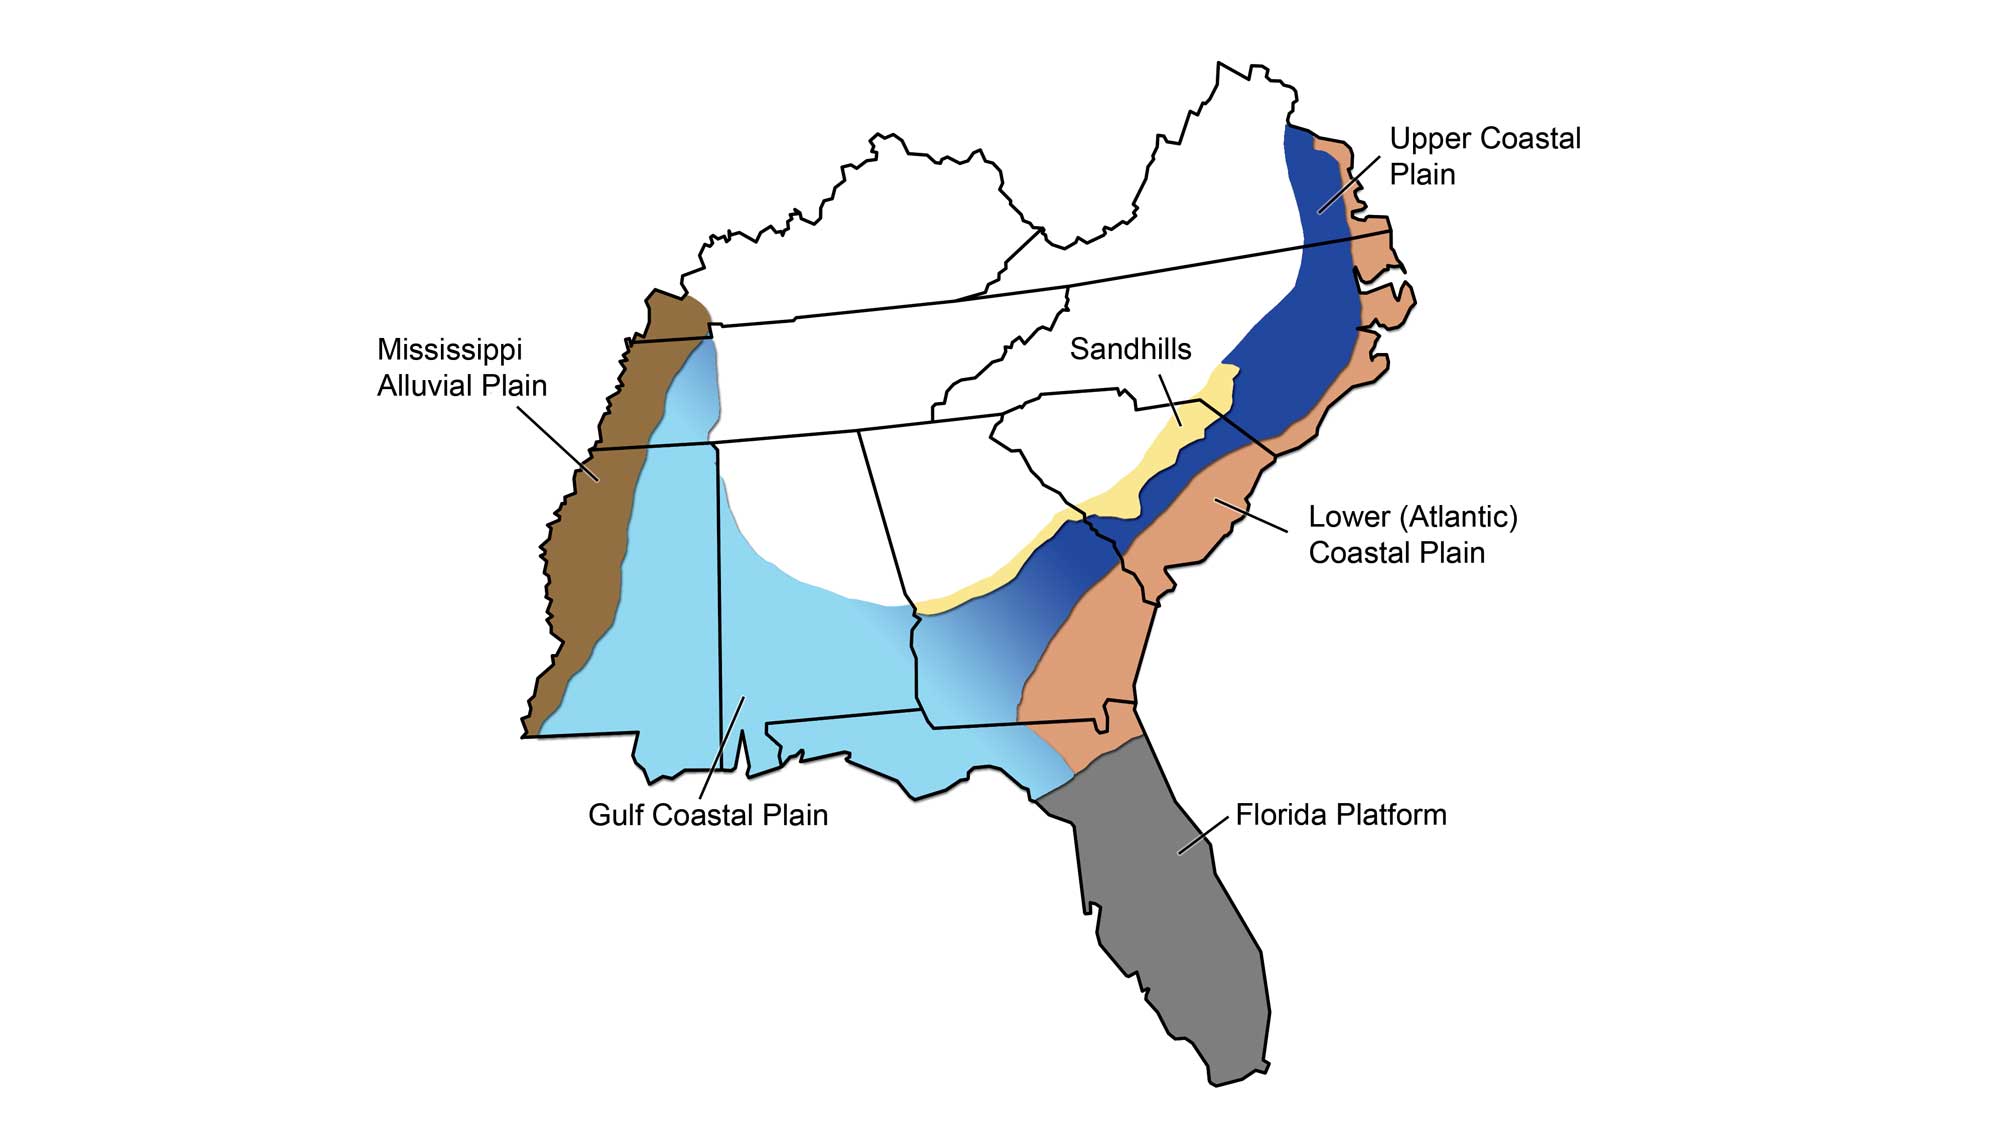 Map showing the physiographic provinces within the Coastal Plain region of the southeastern United States.